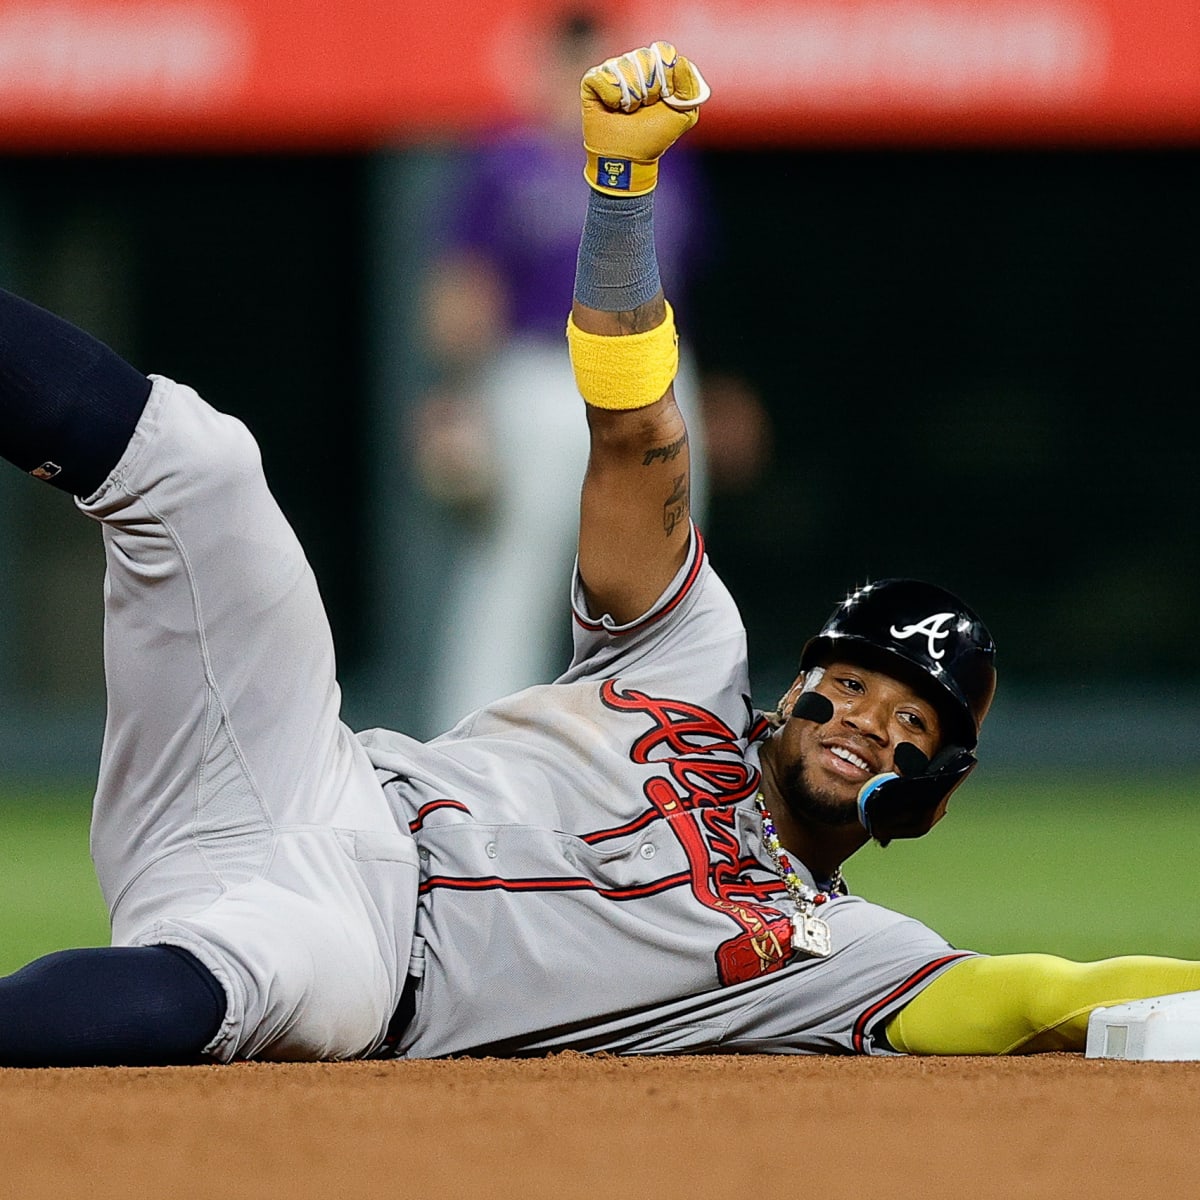 Ronald Acuna Jr. Tackled By Fan During Game